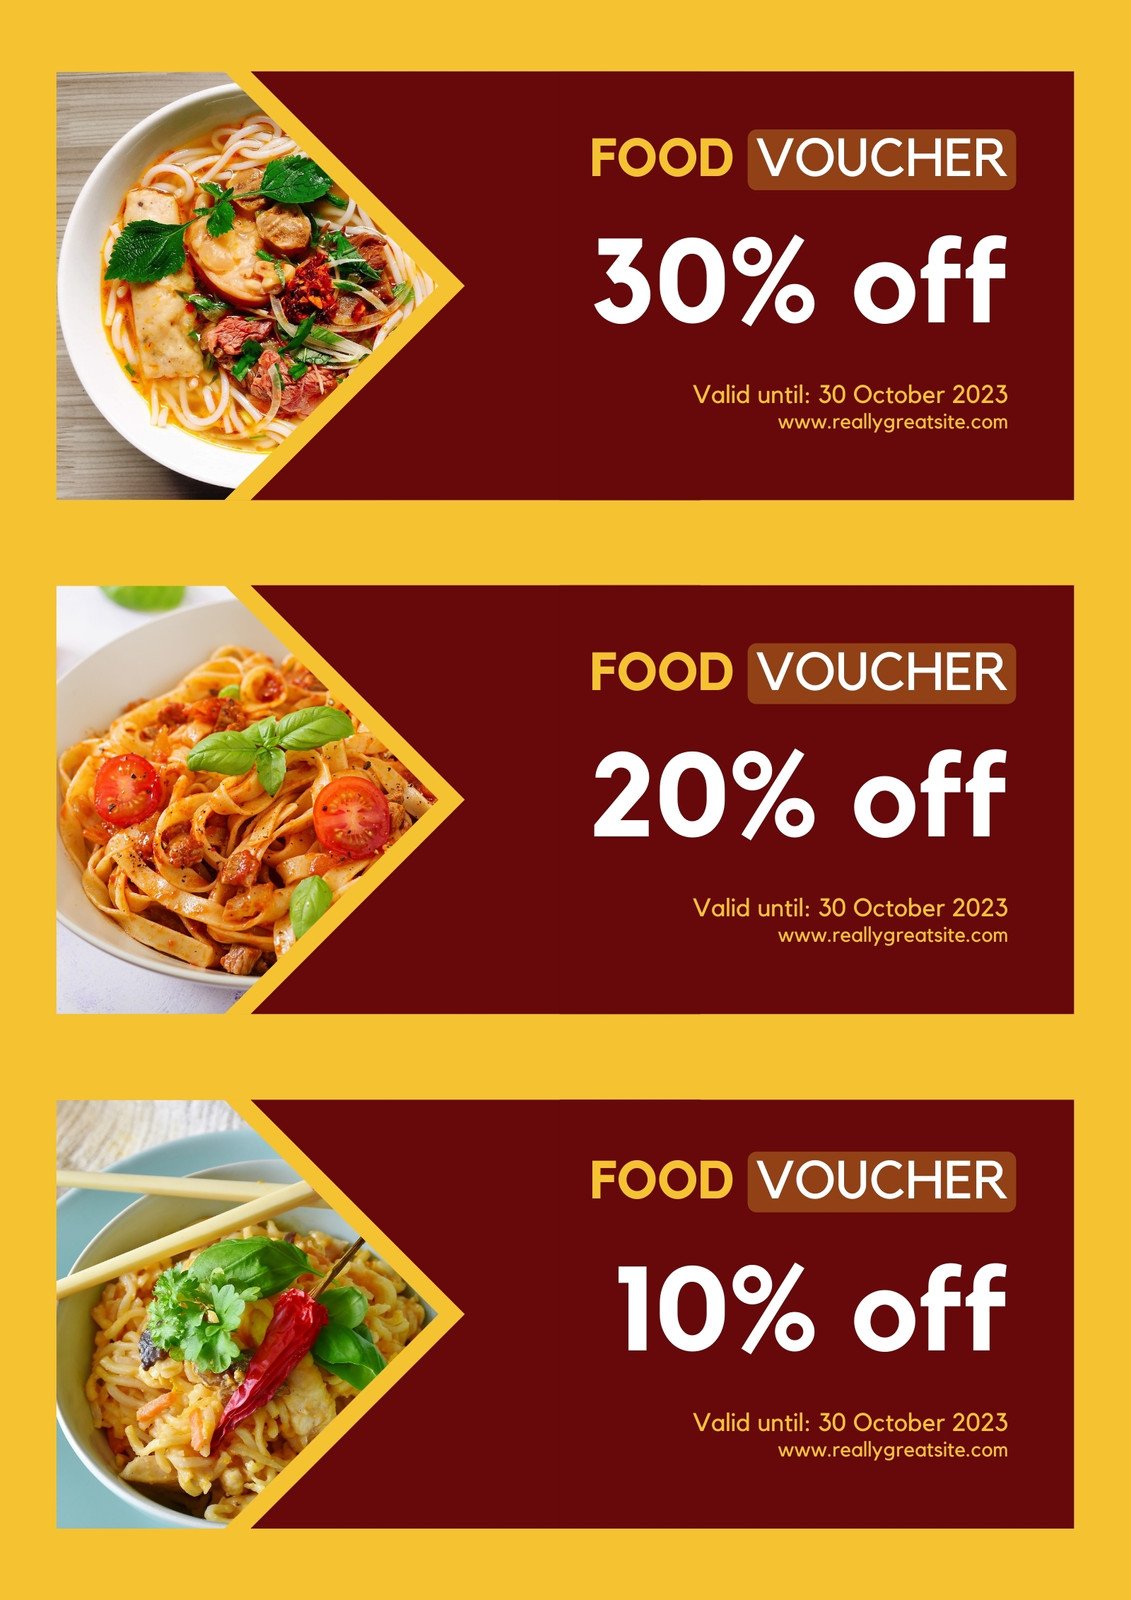 Discounted eatery coupons